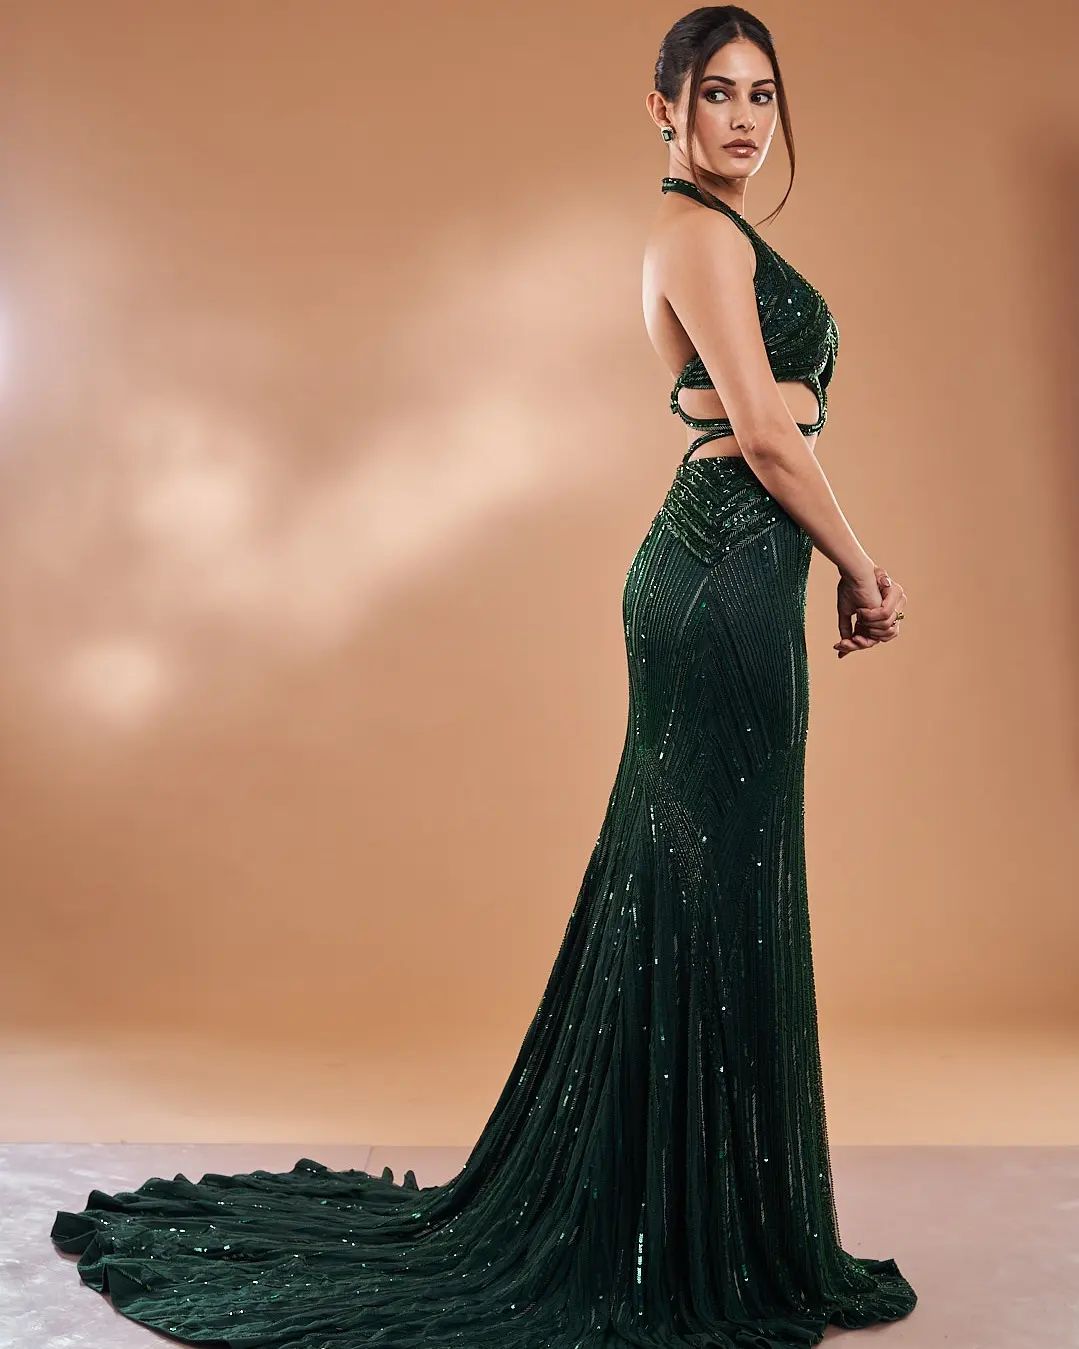 AMYRA DASTUR IN EMERALD GREEN CUT OUT GOWN